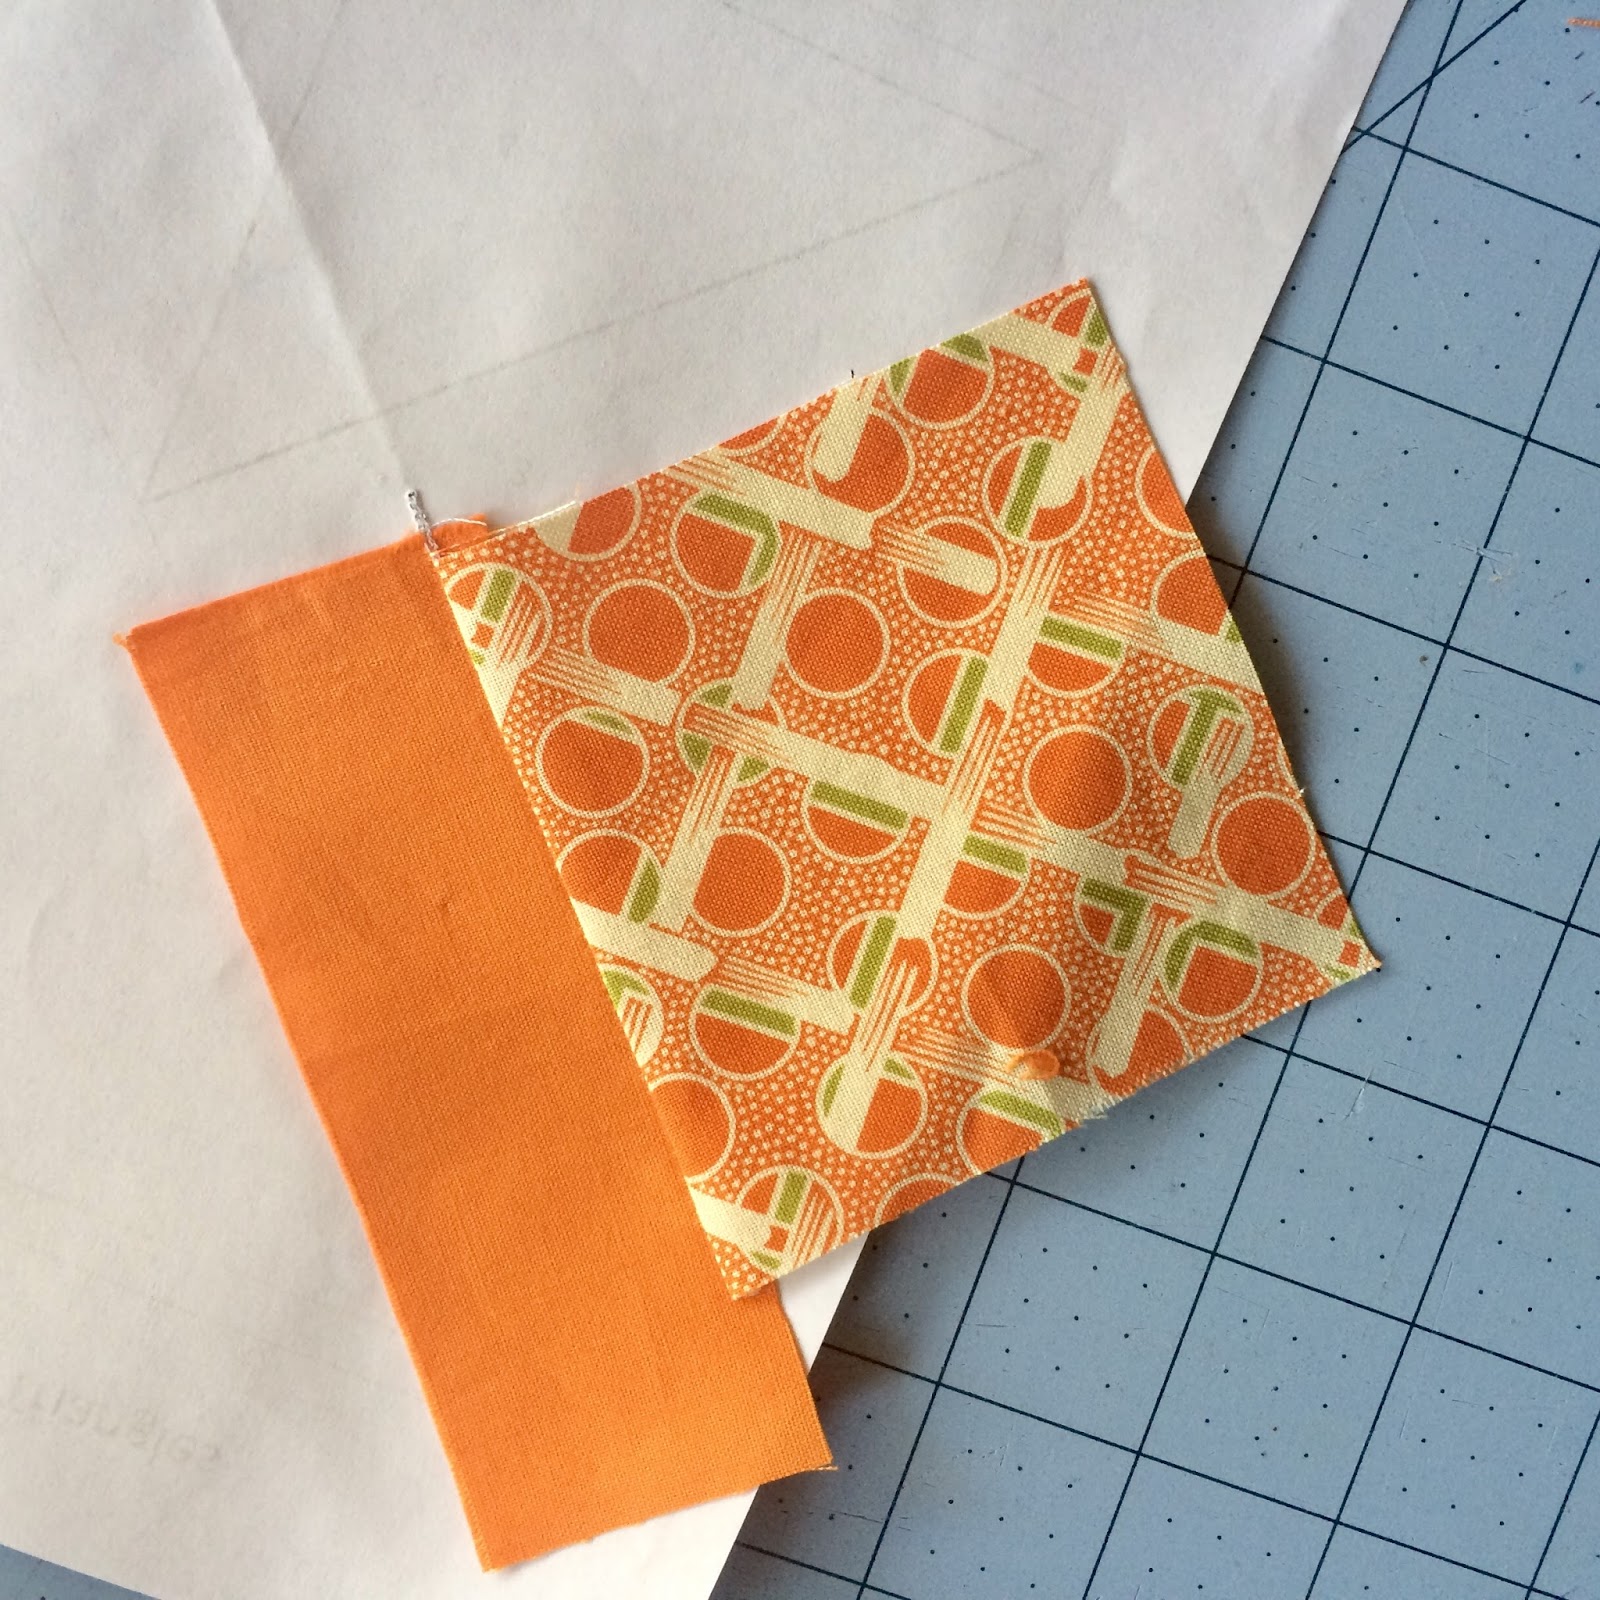 How to Foundation Paper-Piece  Leila Gardunia Quilt Patterns